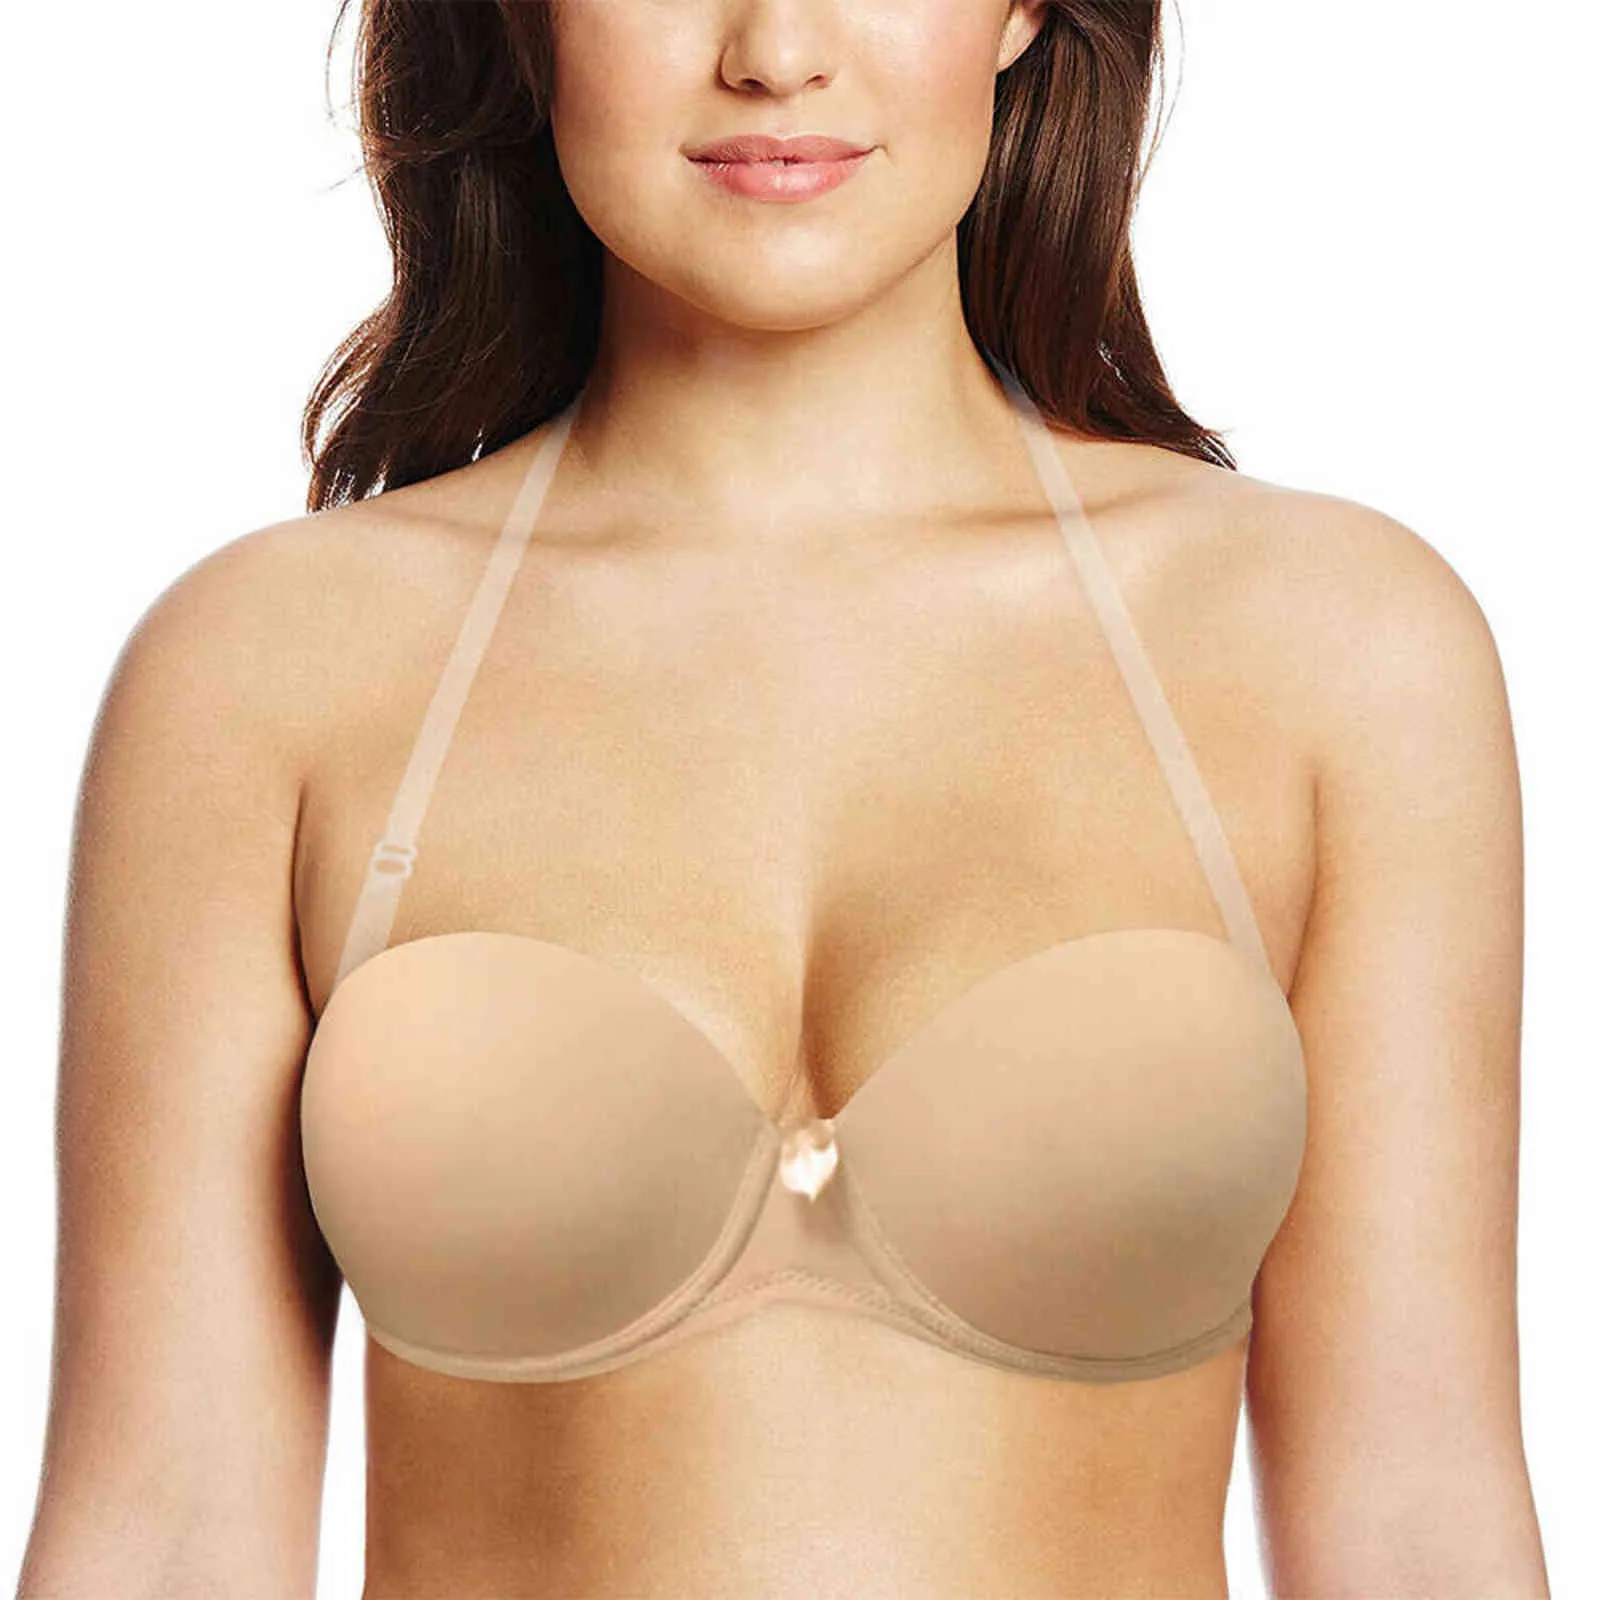 White Strap Upless Push Up Bra With Non Slip Band Strap Up For